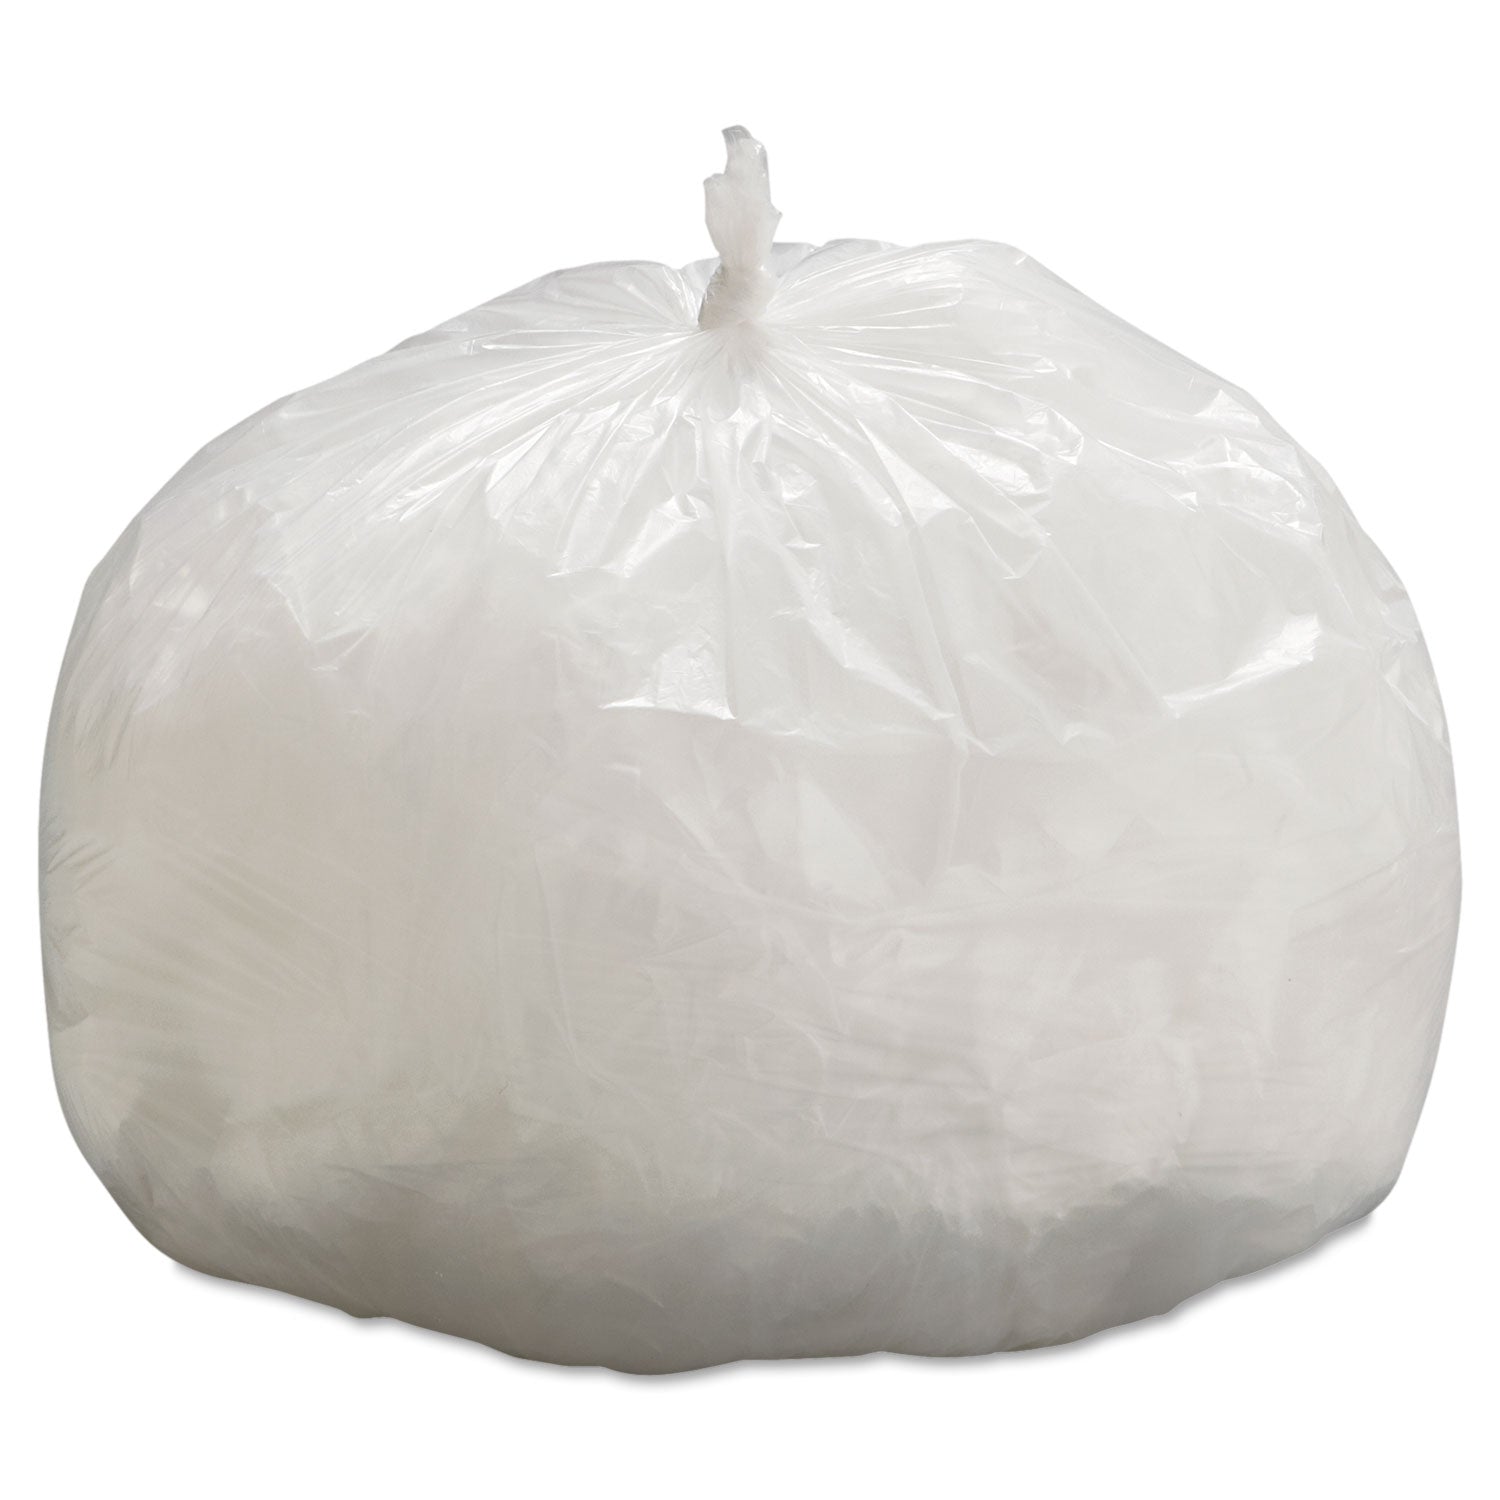 high-density-can-liners-33-gal-9-mic-33-x-39-natural-25-bags-roll-20-rolls-carton_bwk333912 - 1